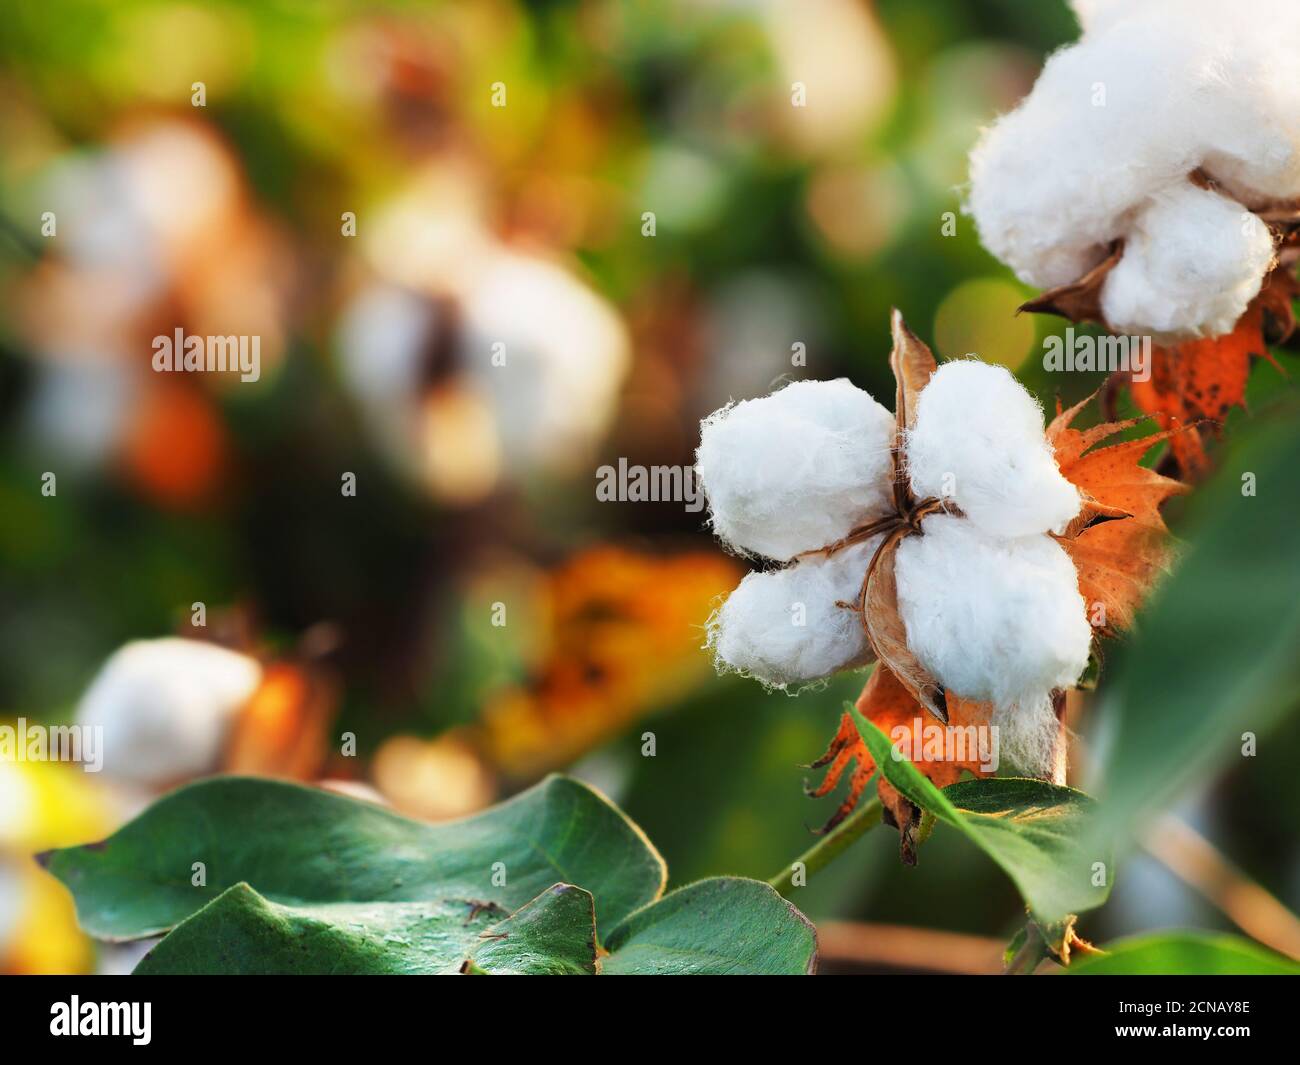 Branch of cotton on a blurred background. Cotton closeup. Stock Photo